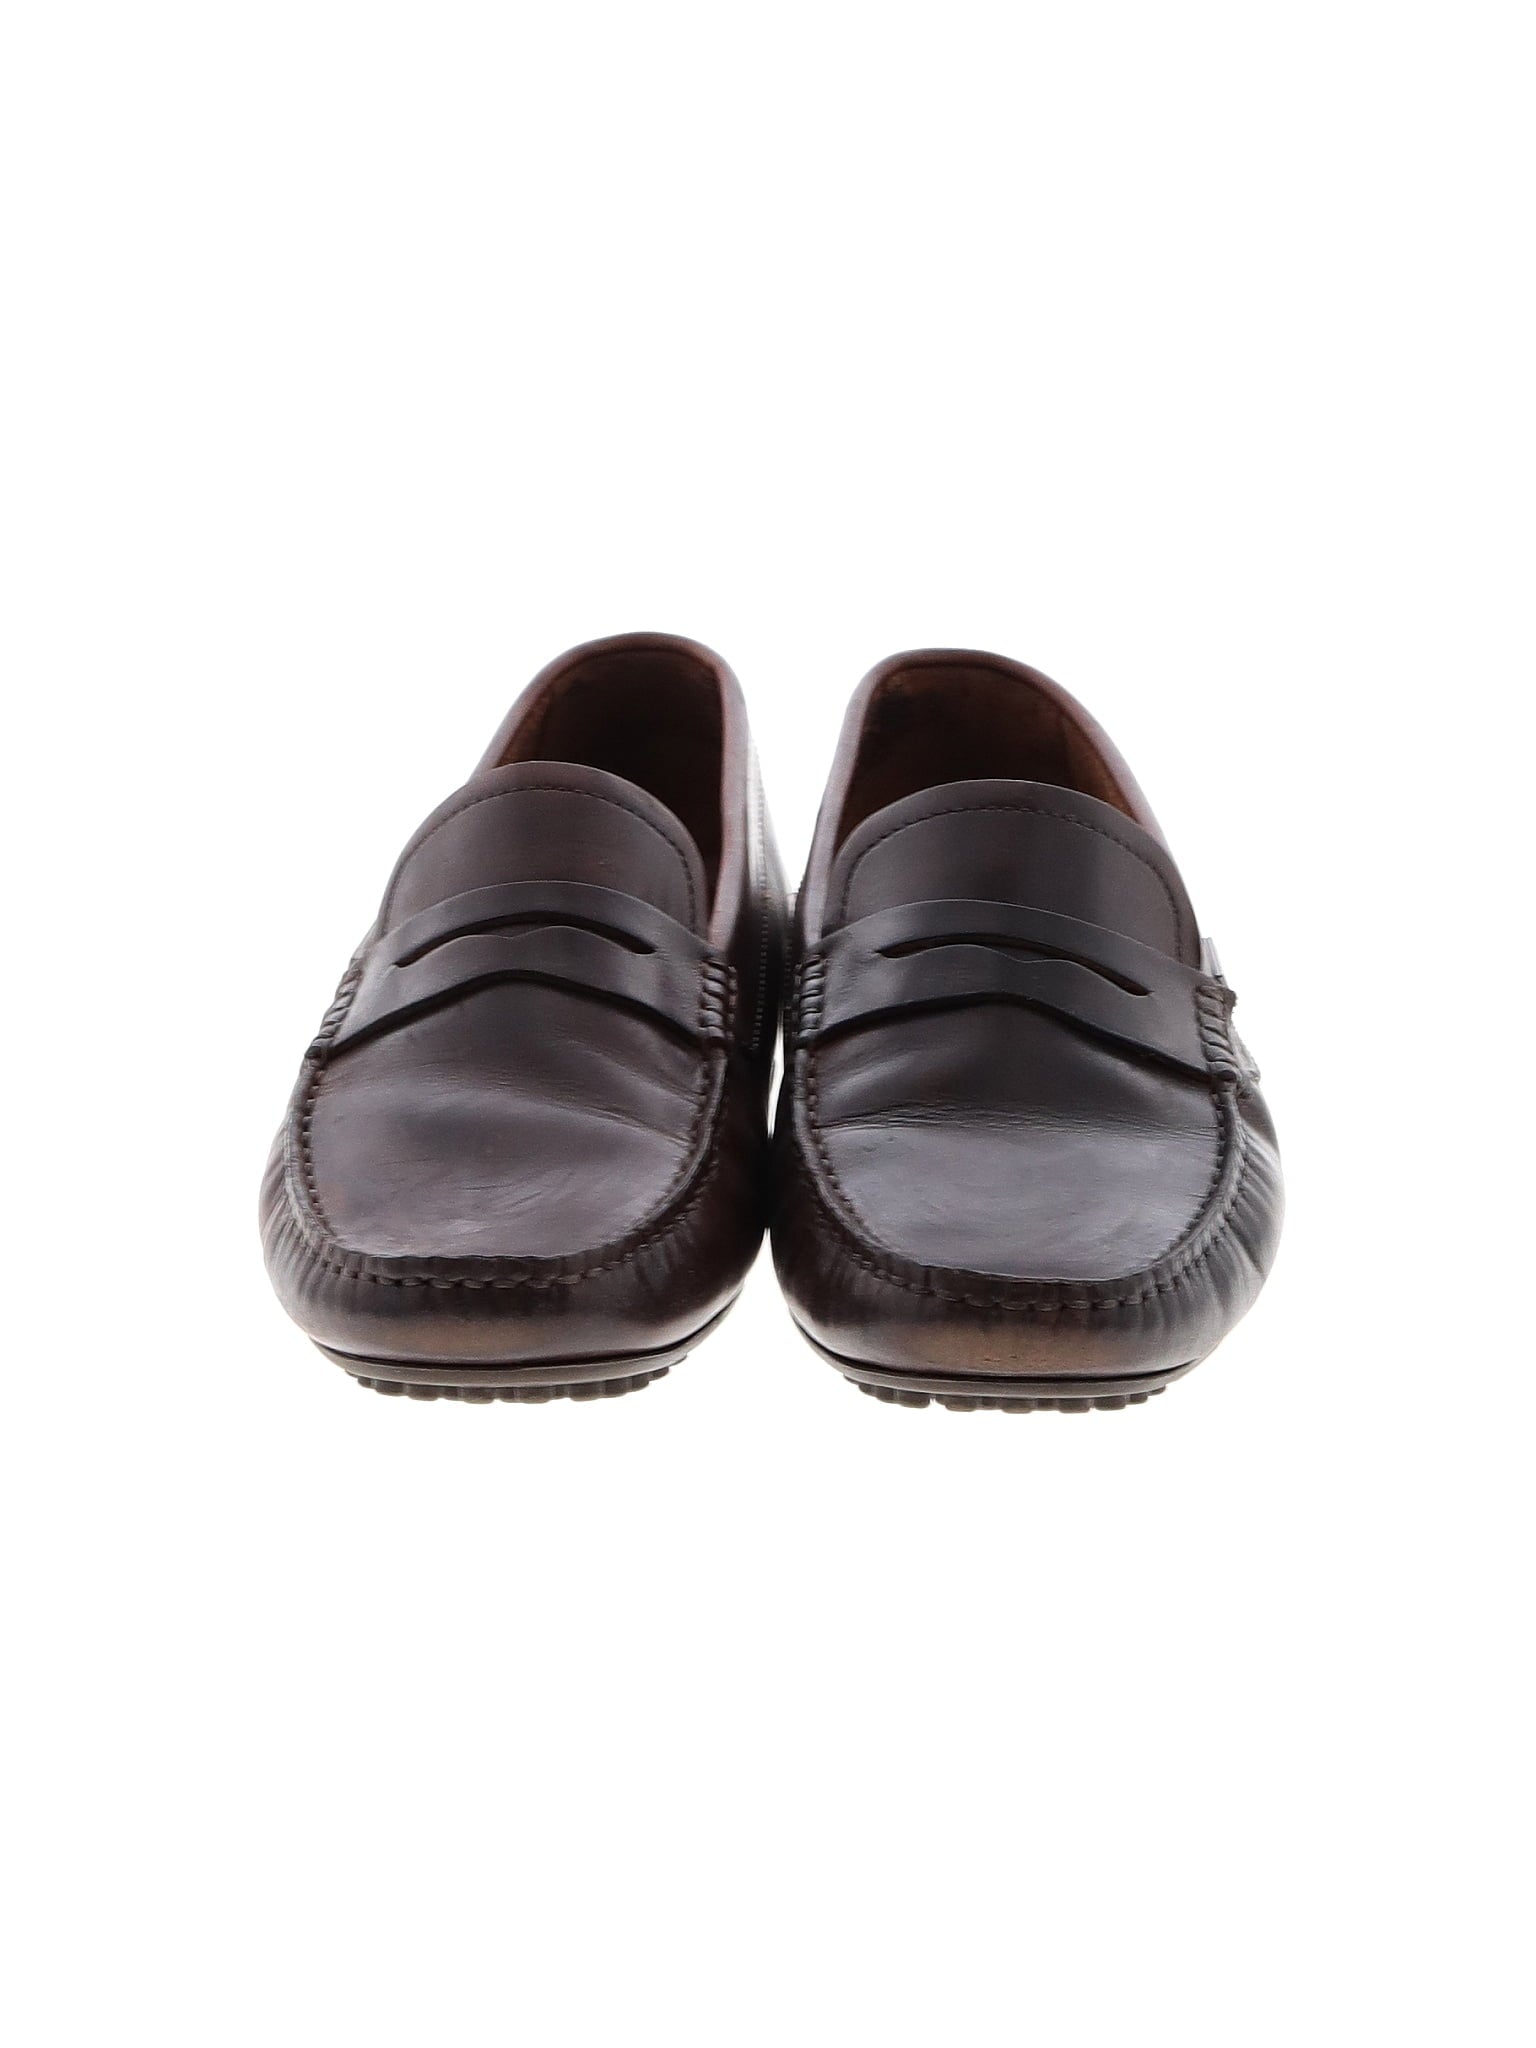 Loafers size - 9